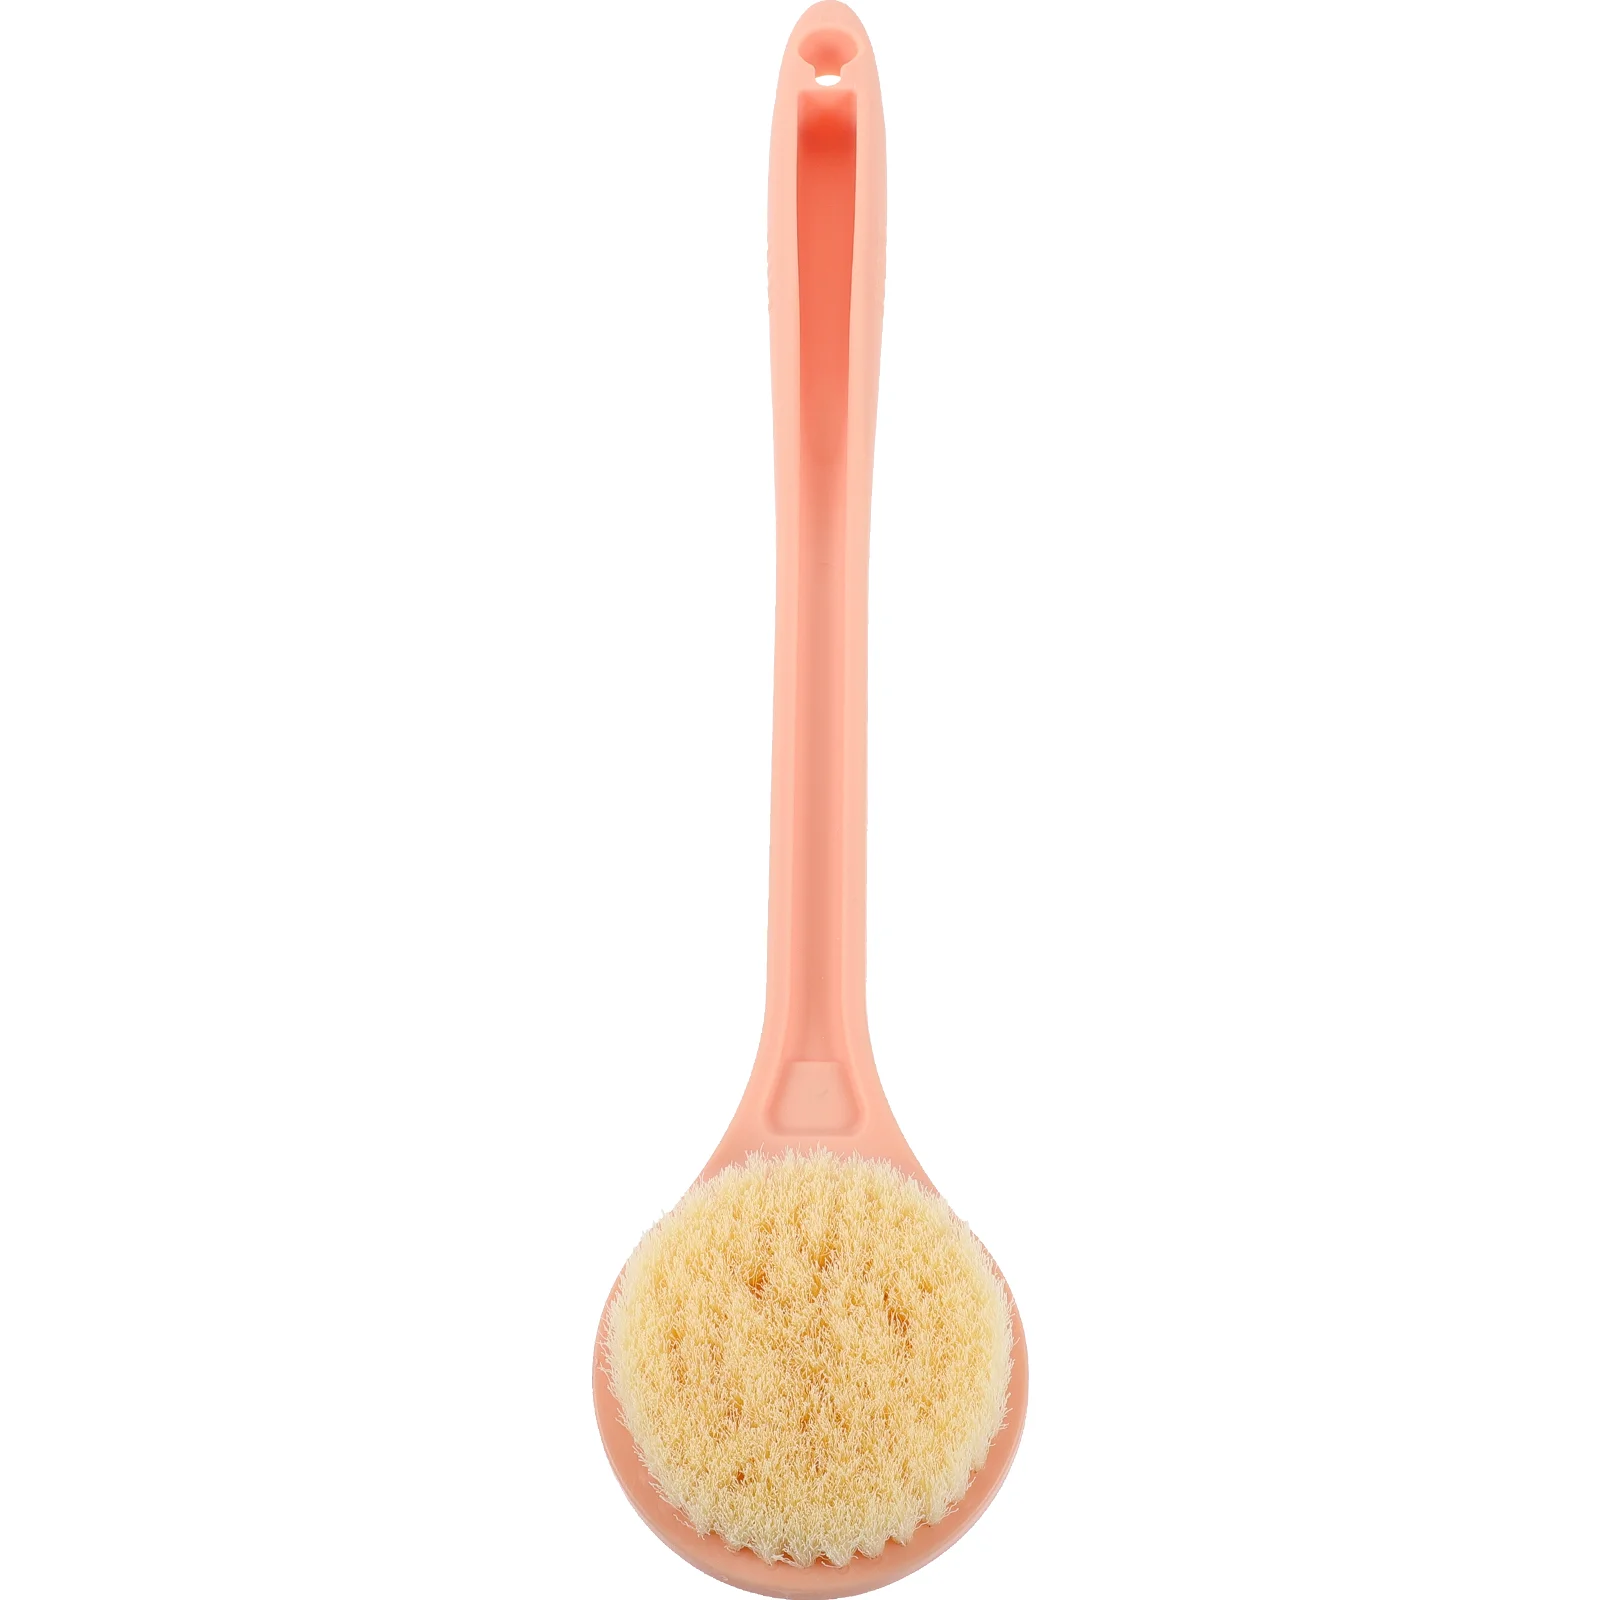 bath brush body bath shower sponge scrubber brushes with handle exfoliating shower cleaning remove exfoliating bathroom wash Bath Brush Exfoliating Back Scrubber Scrubbers for Use Shower Body with Handle The Dry Mens